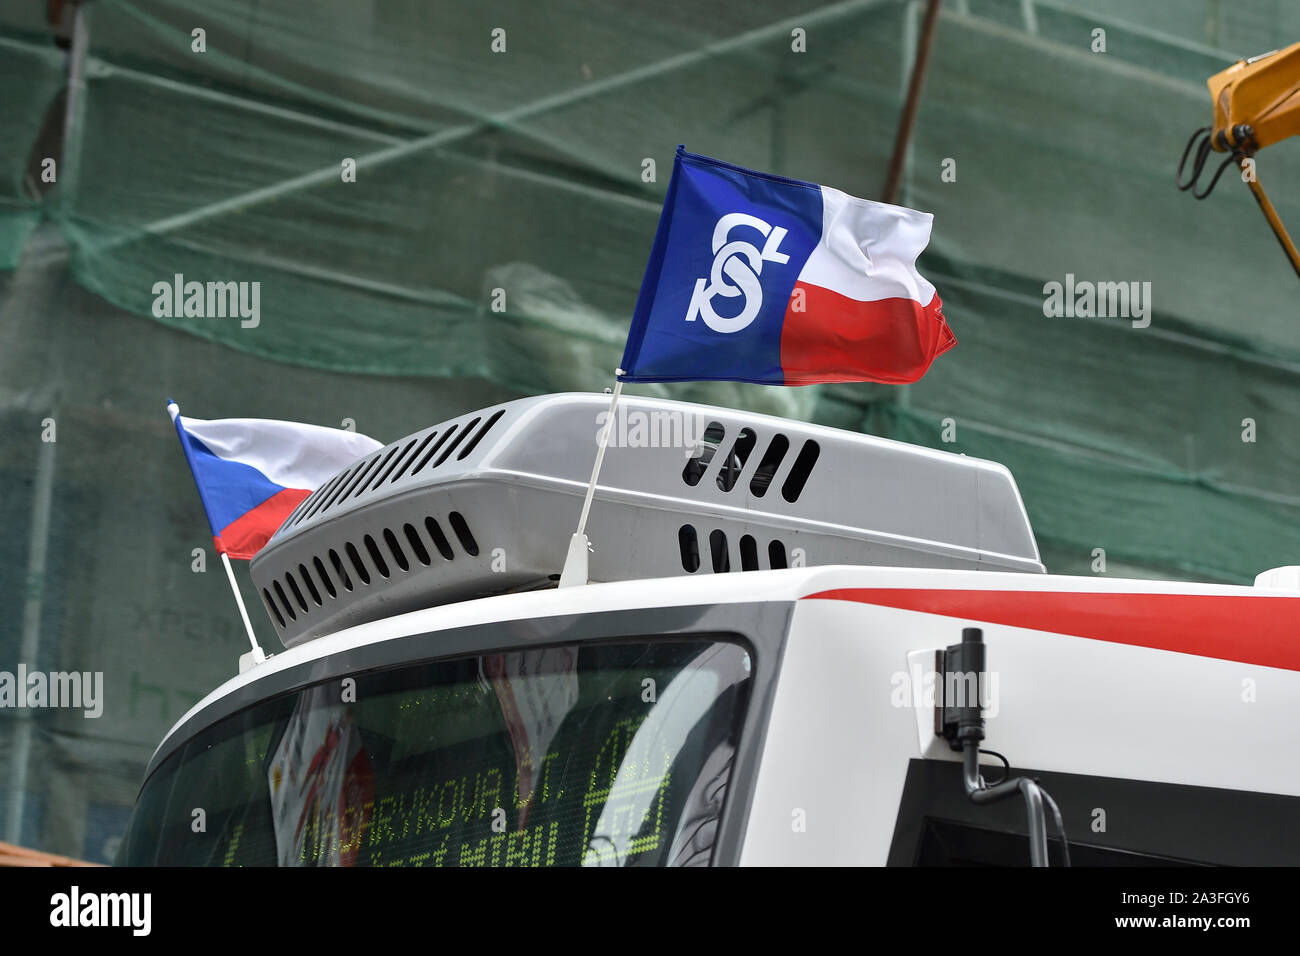 The Falcon flag has appeared at the public transport tram in Brno, as Czechia commemorates today, on Tuesday, October 8, 2019, for the first time as a Day of Significance, the 1,500 members of the Sokol (Falcon) sports organisation whom the Nazis arrested and deported to concentration camps on new Deputy Reichsprotektor Reinhard Heydrich's order in the night of October 8, 1941. A few days after the raid, the Nazis banned Falcon. A total of about 5,000 Falcon members were murdered or died in fightings during WWII. Commemorative events and exhibitions highlighting the fate of the Falcon victims Stock Photo